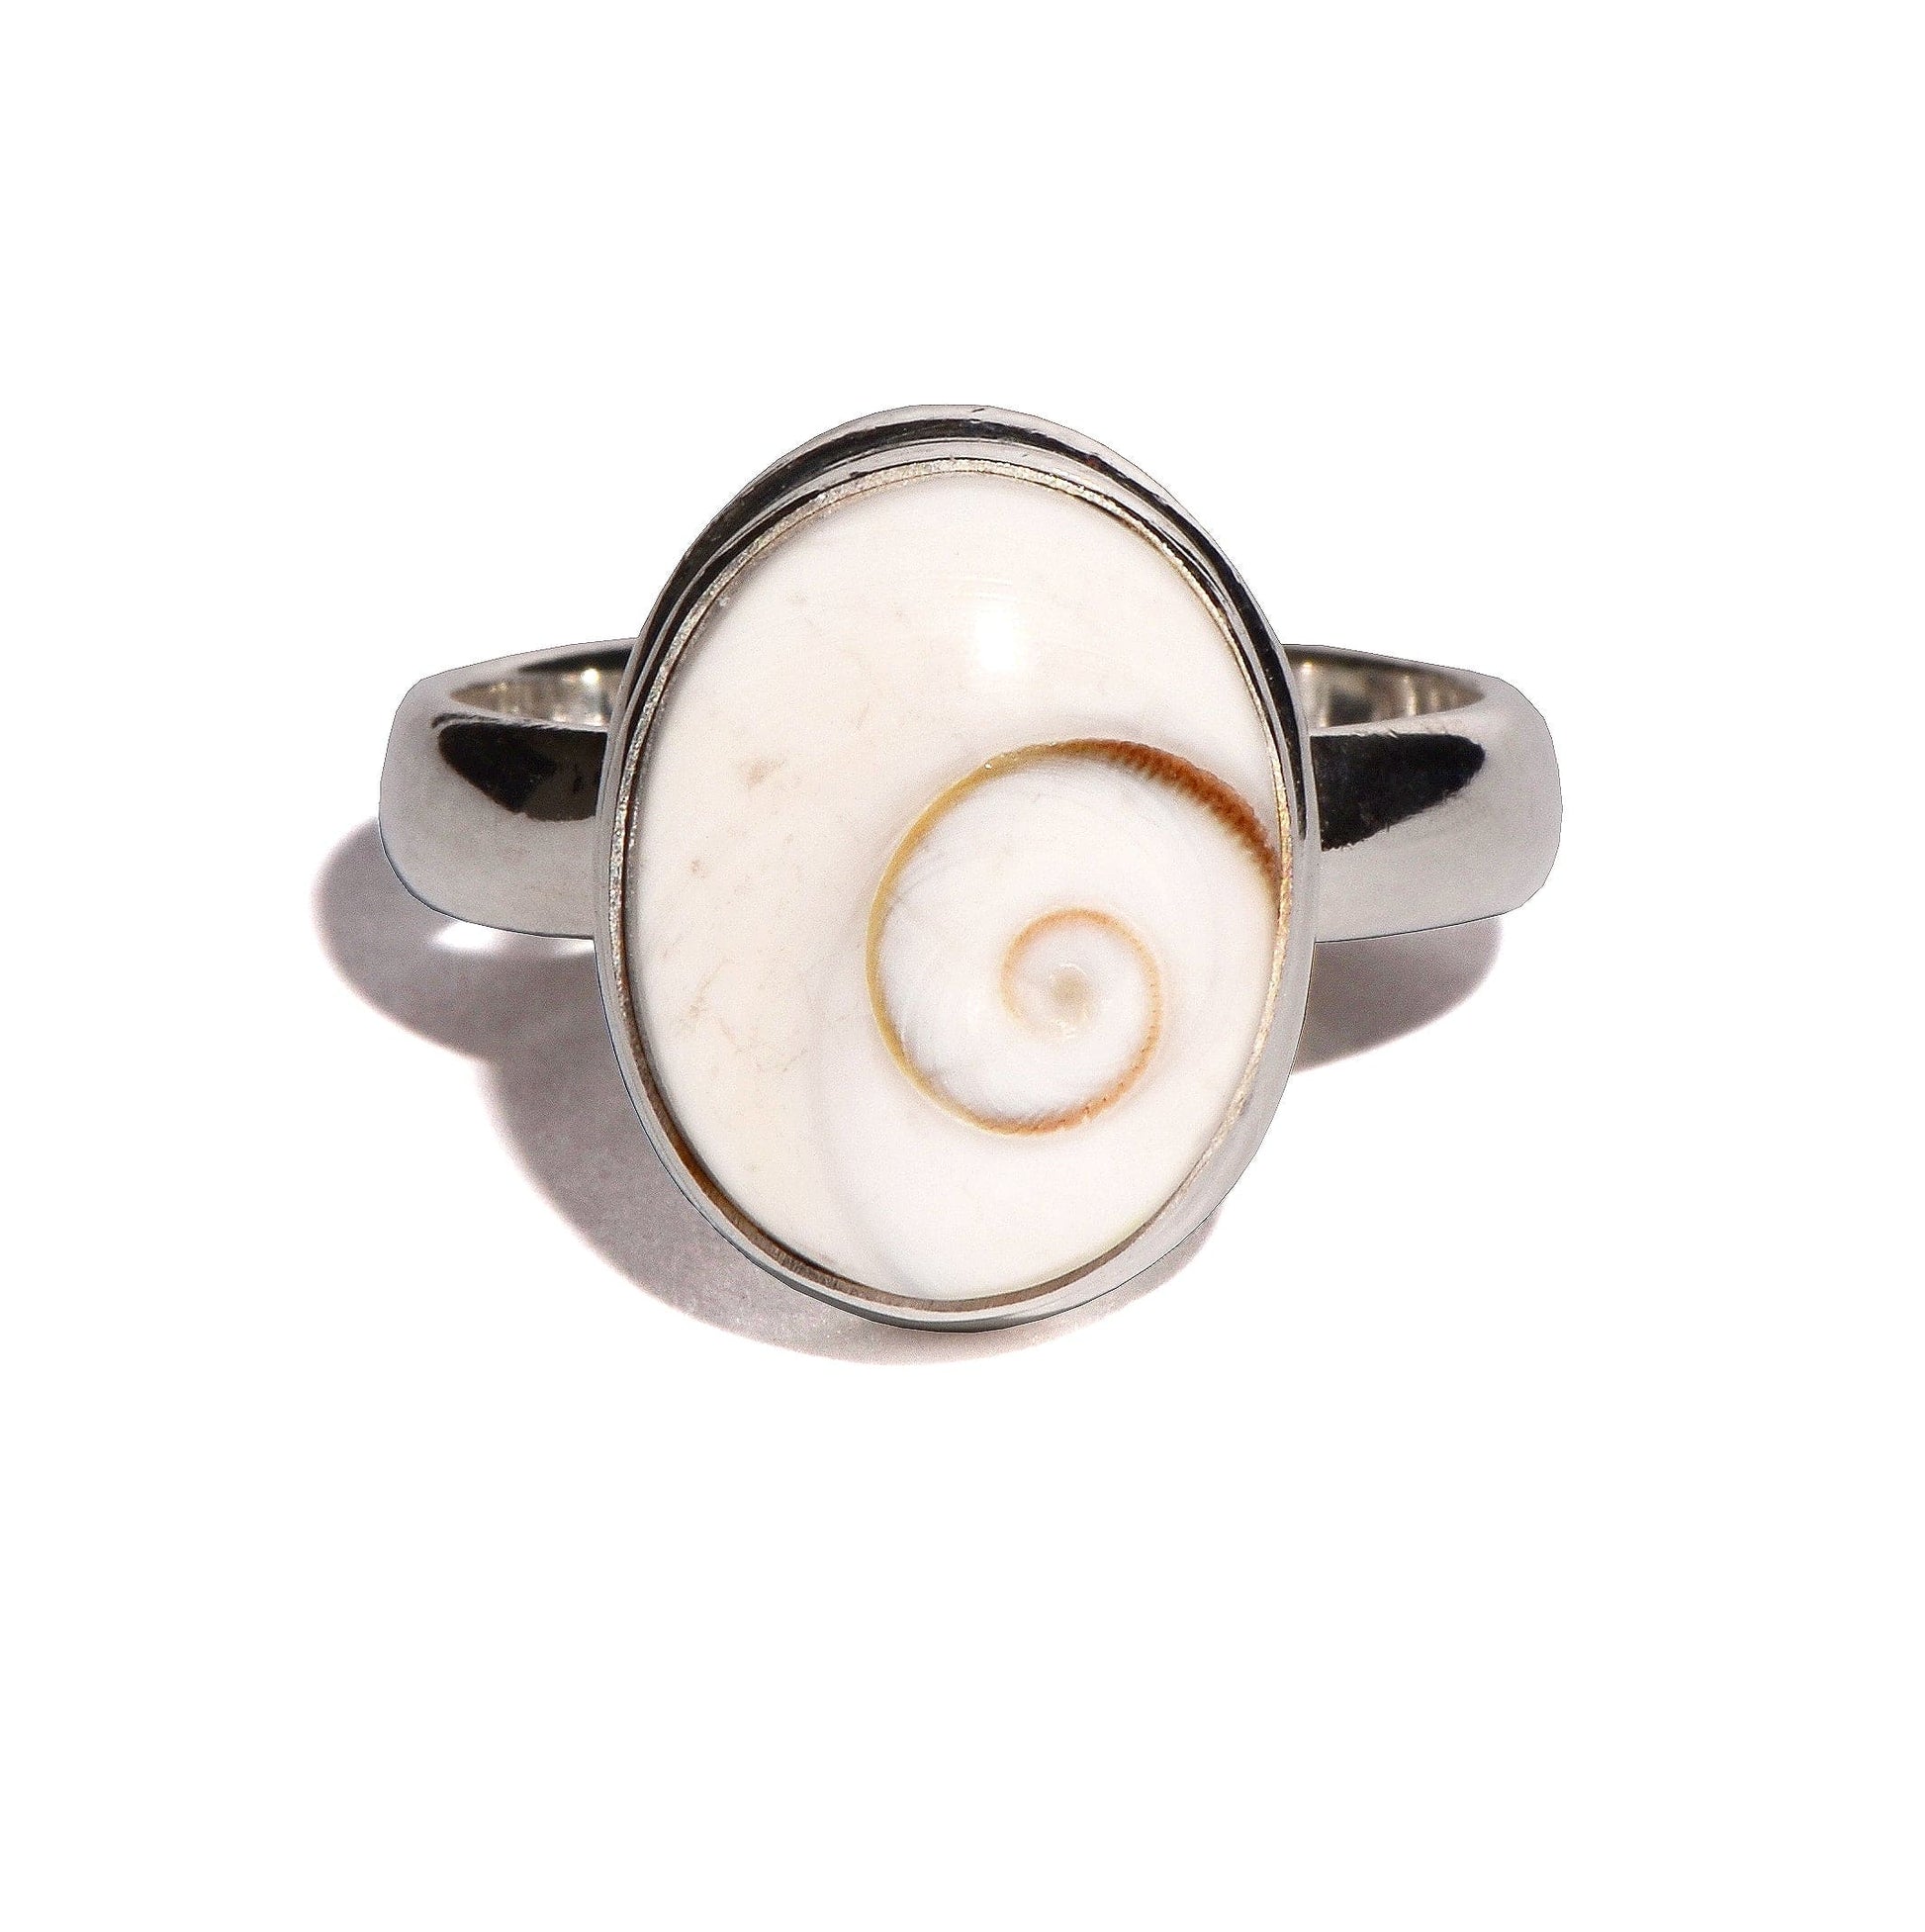 Shiva Shell Sterling Silver Ring - Oval